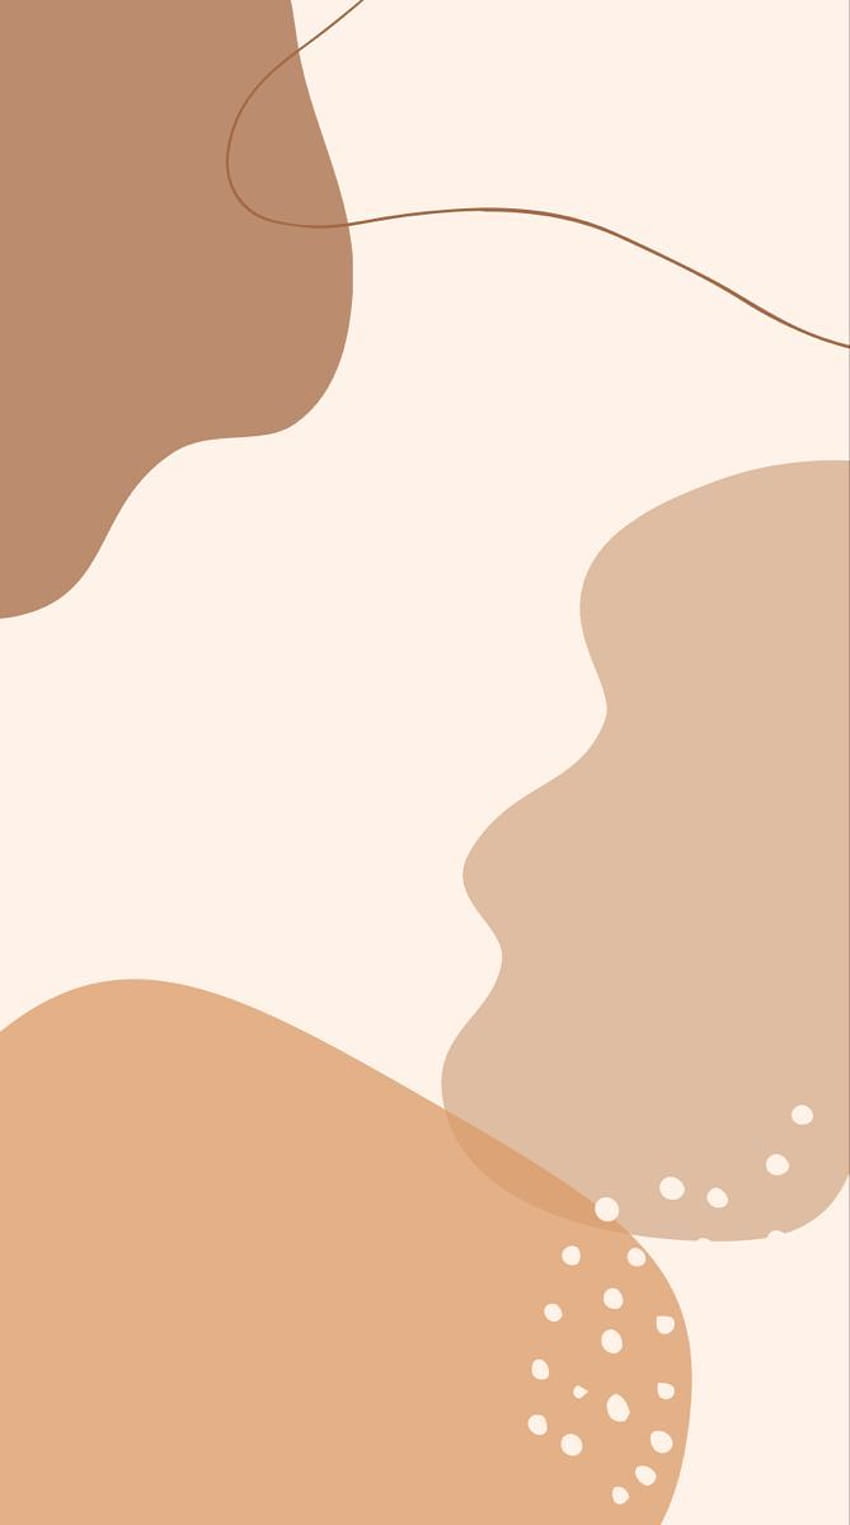 A poster with an abstract design - Profile picture, abstract, minimalist beige, neutral